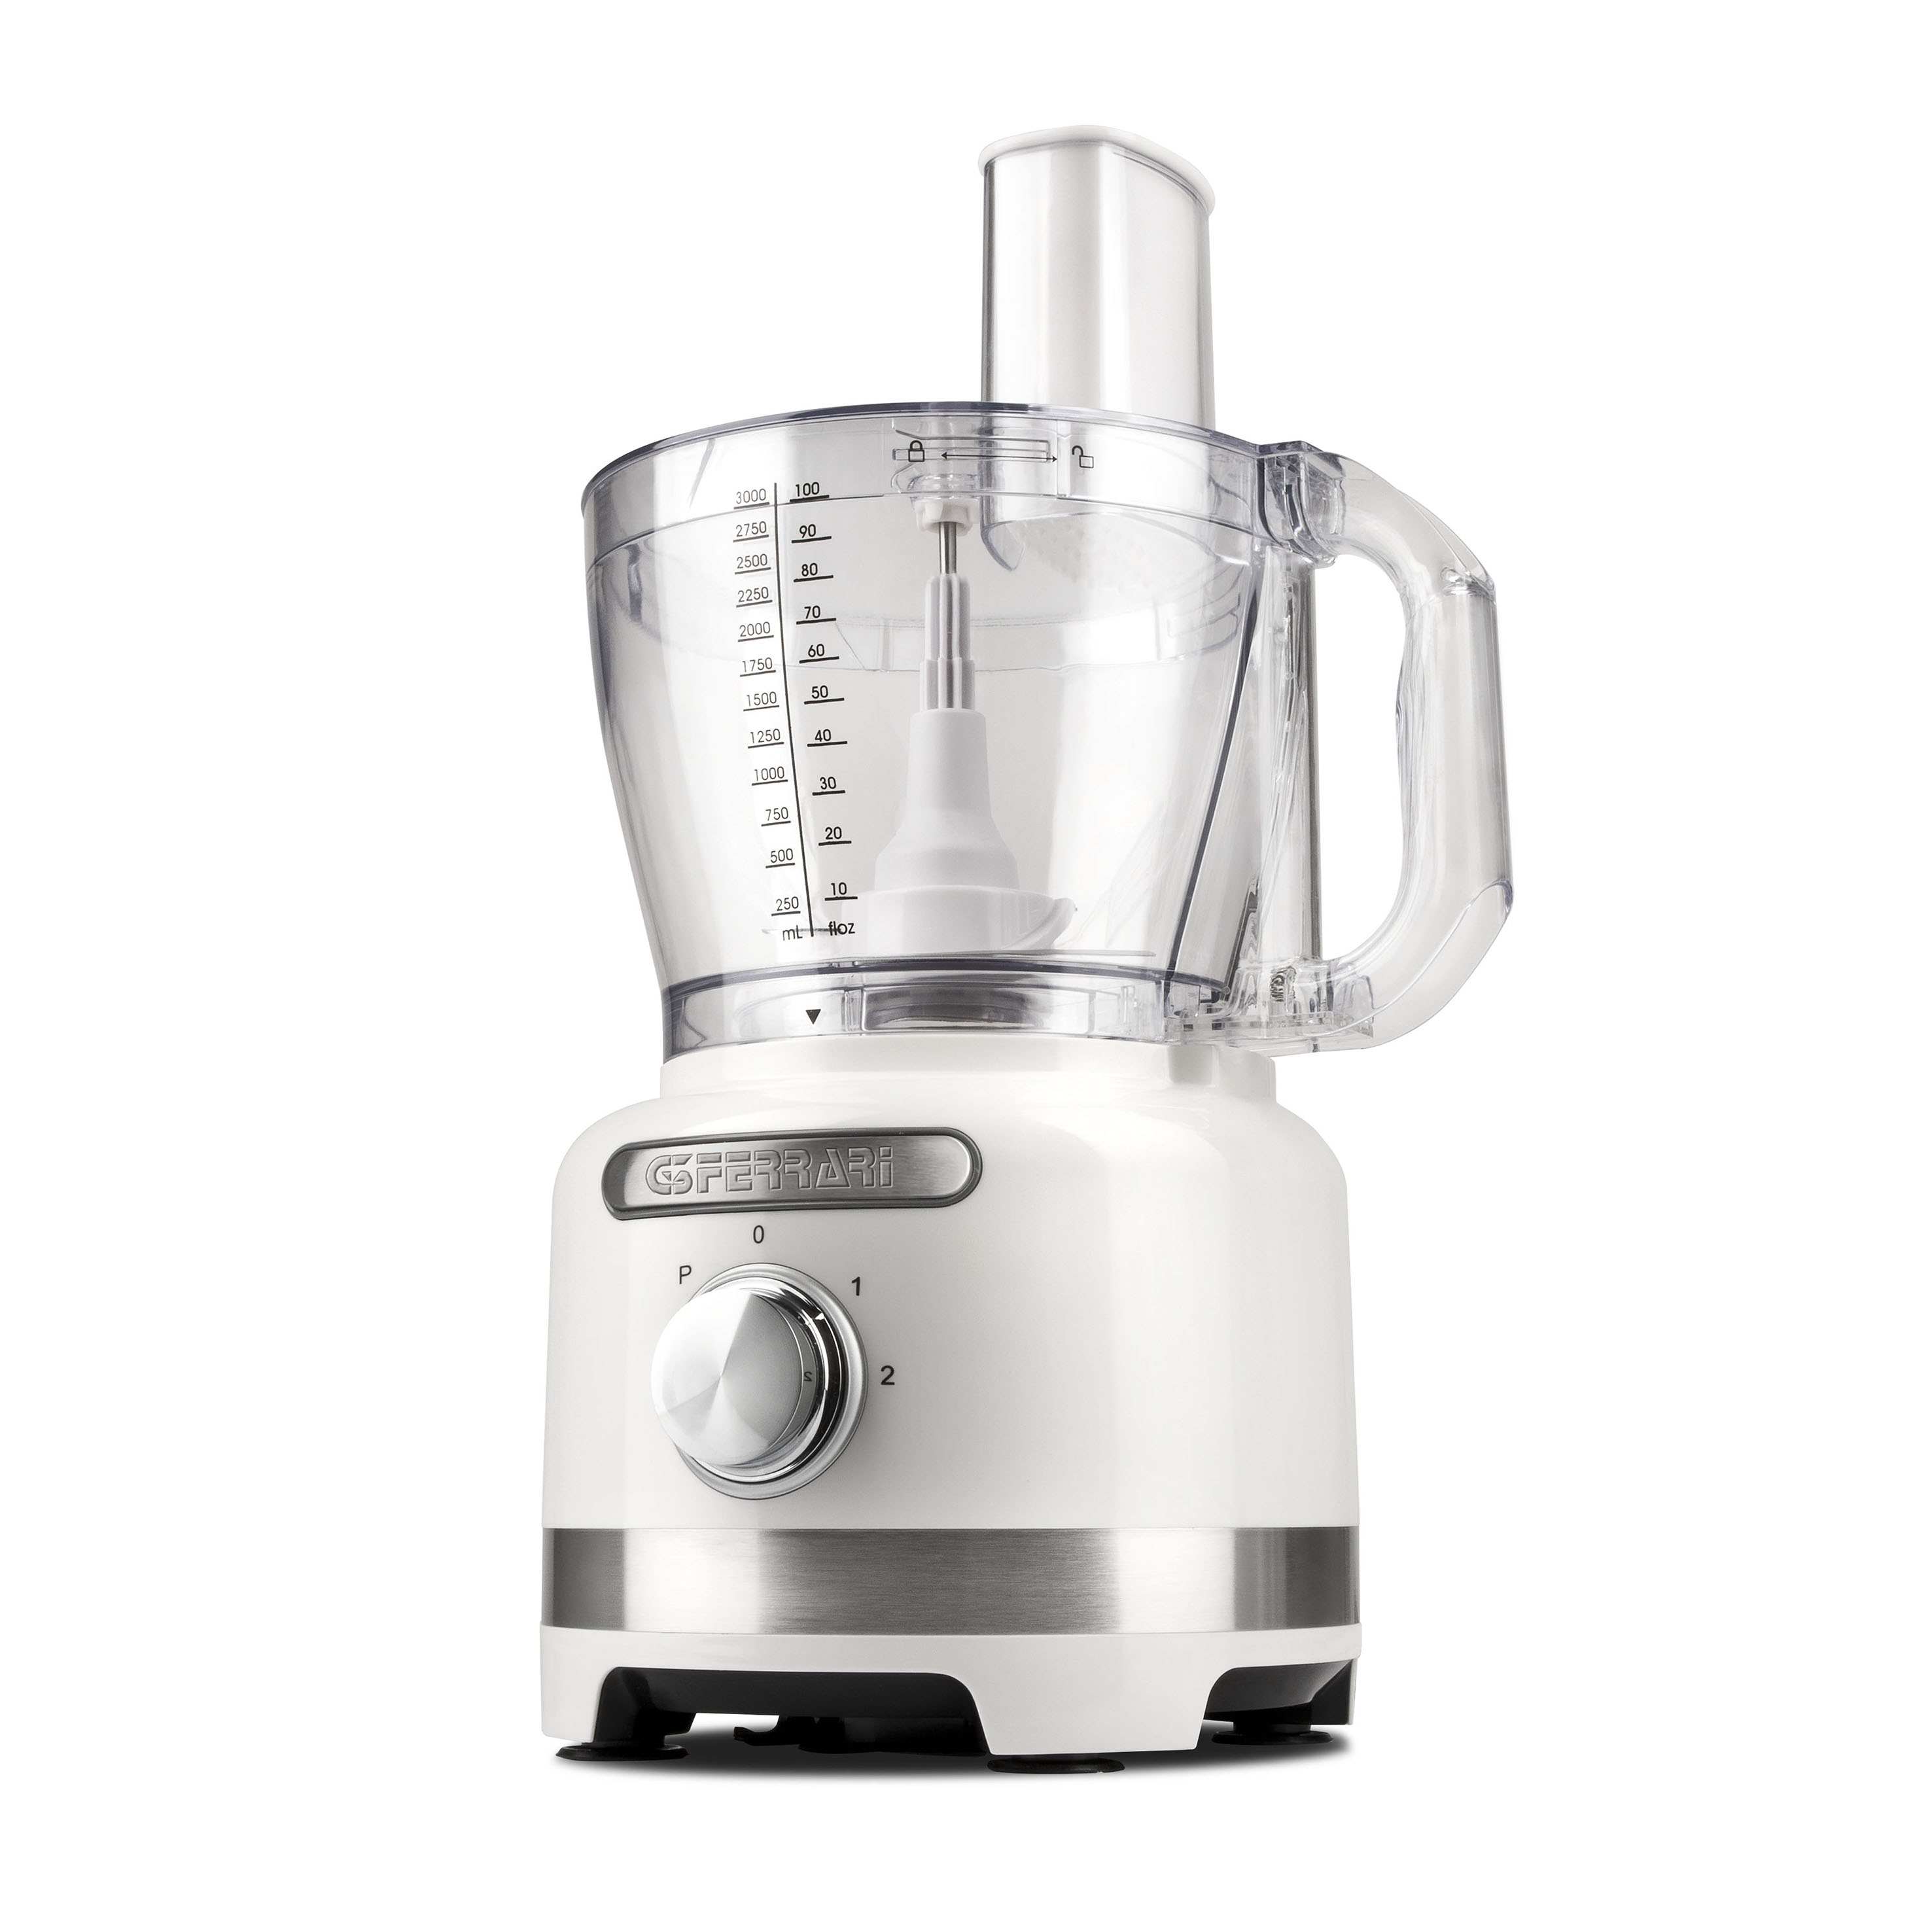 G2009901, Mixatutto, food processor, with blender, 1000W, white